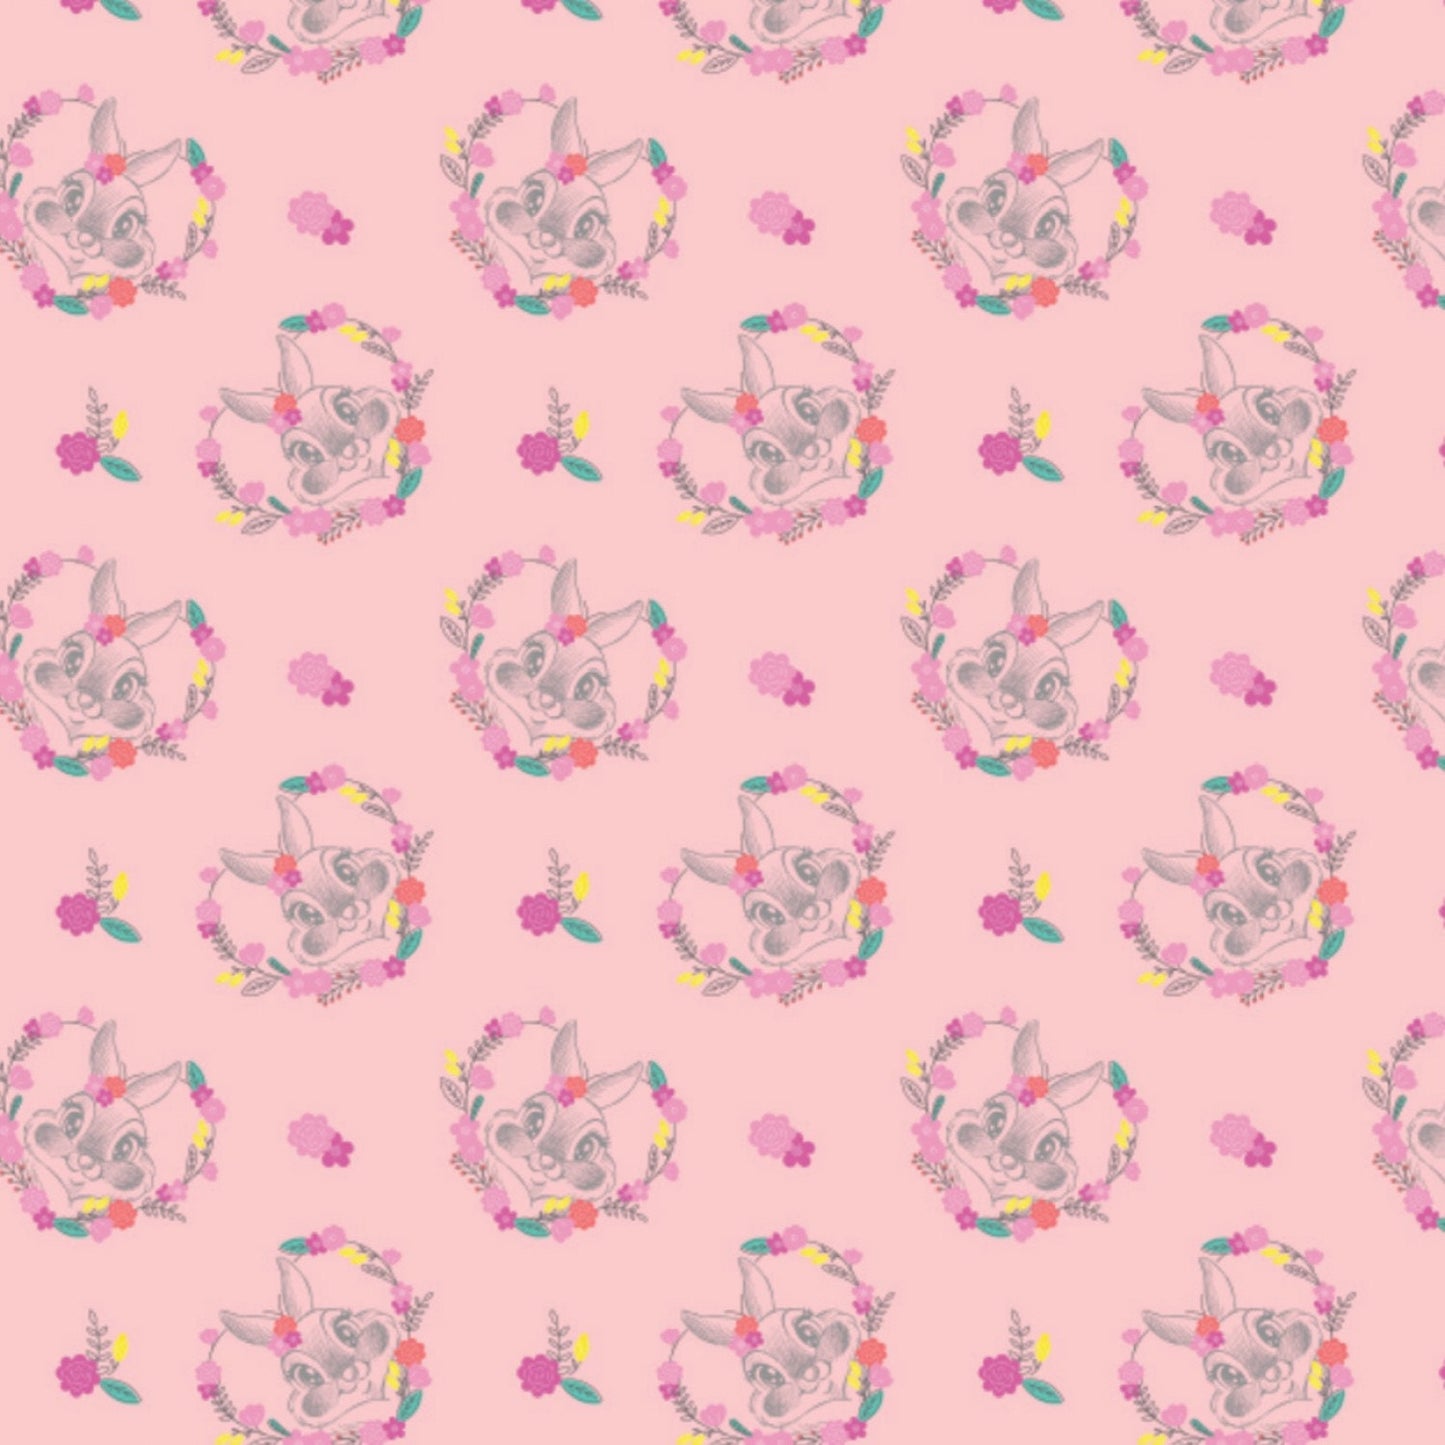 Disney Dress to Impress Bunny Floral Heart Pink 85040203-1 Licensed Cotton Woven Fabric